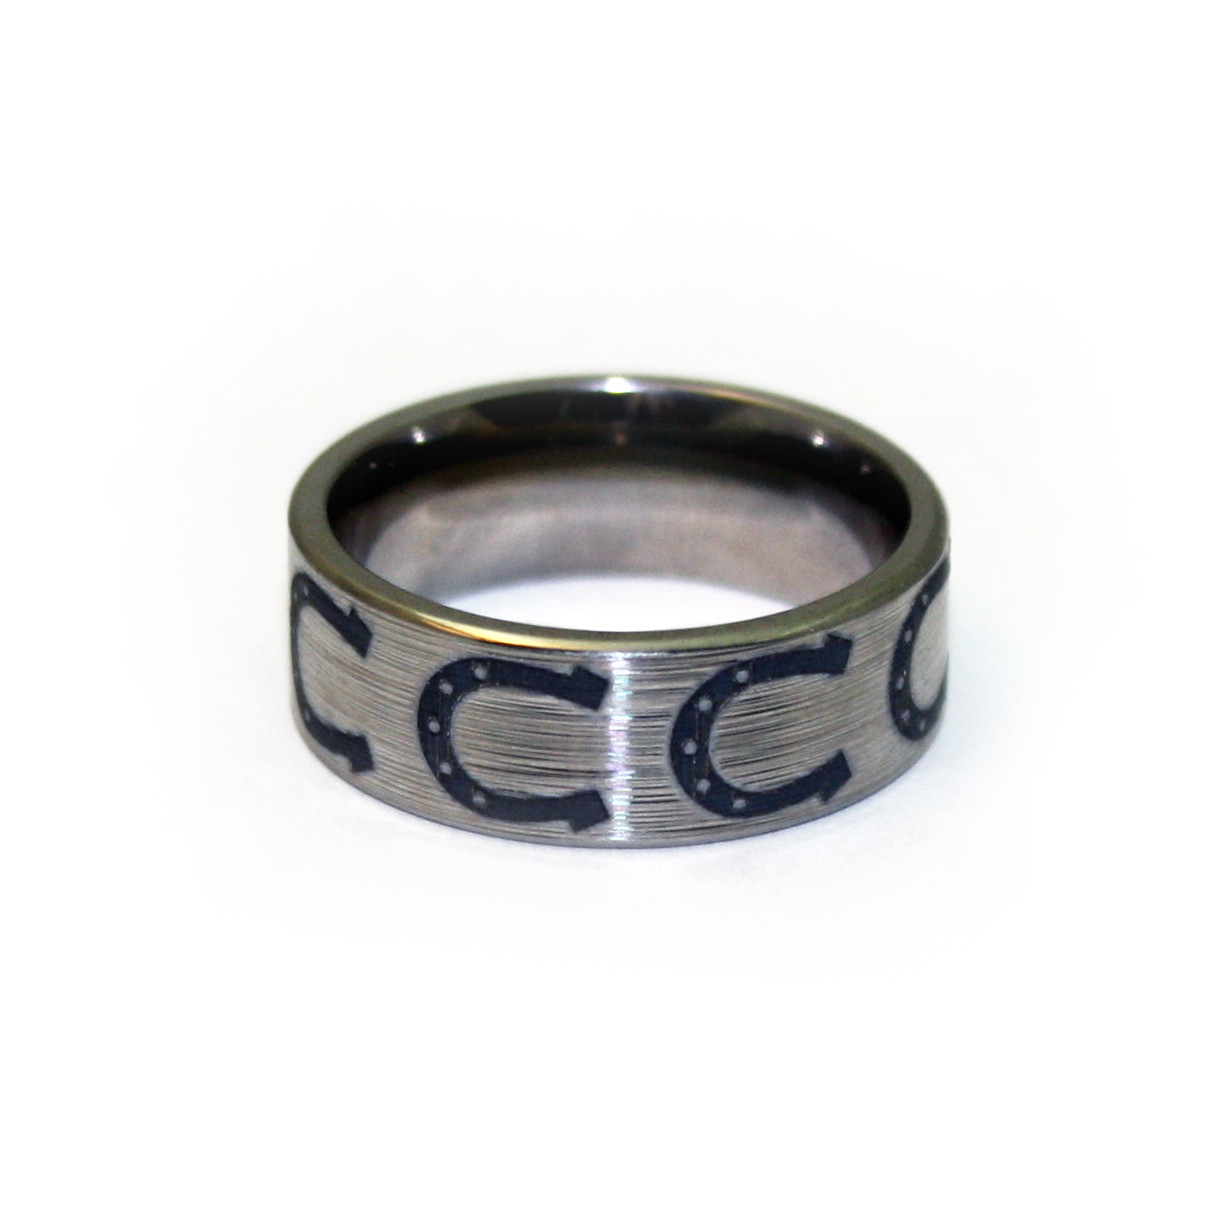 Horseshoe Wedding Rings
 Horseshoe Wedding Ring Titanium Horse Ring